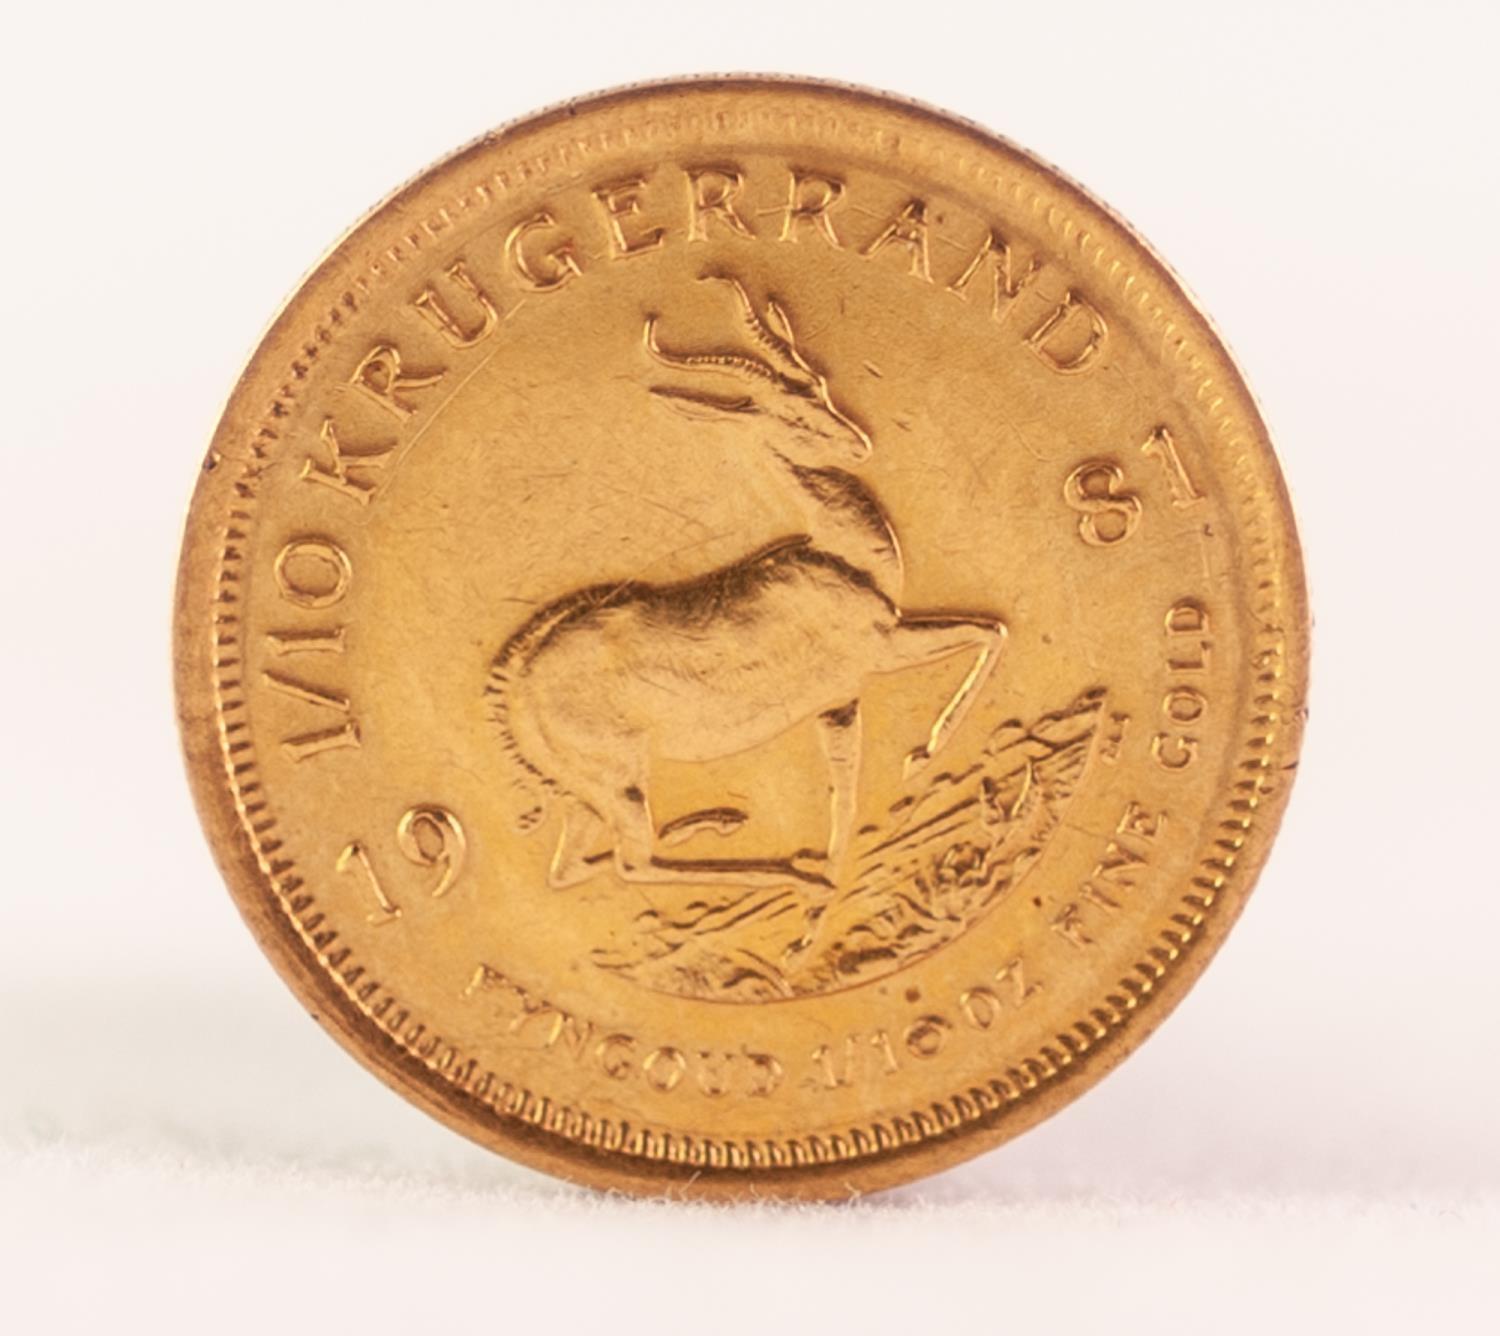 SOUTH AFRICAN FINE GOLD 1/10th OF AN OZ KRUGERAND, 1981, approximately 3.4gms - Image 2 of 2